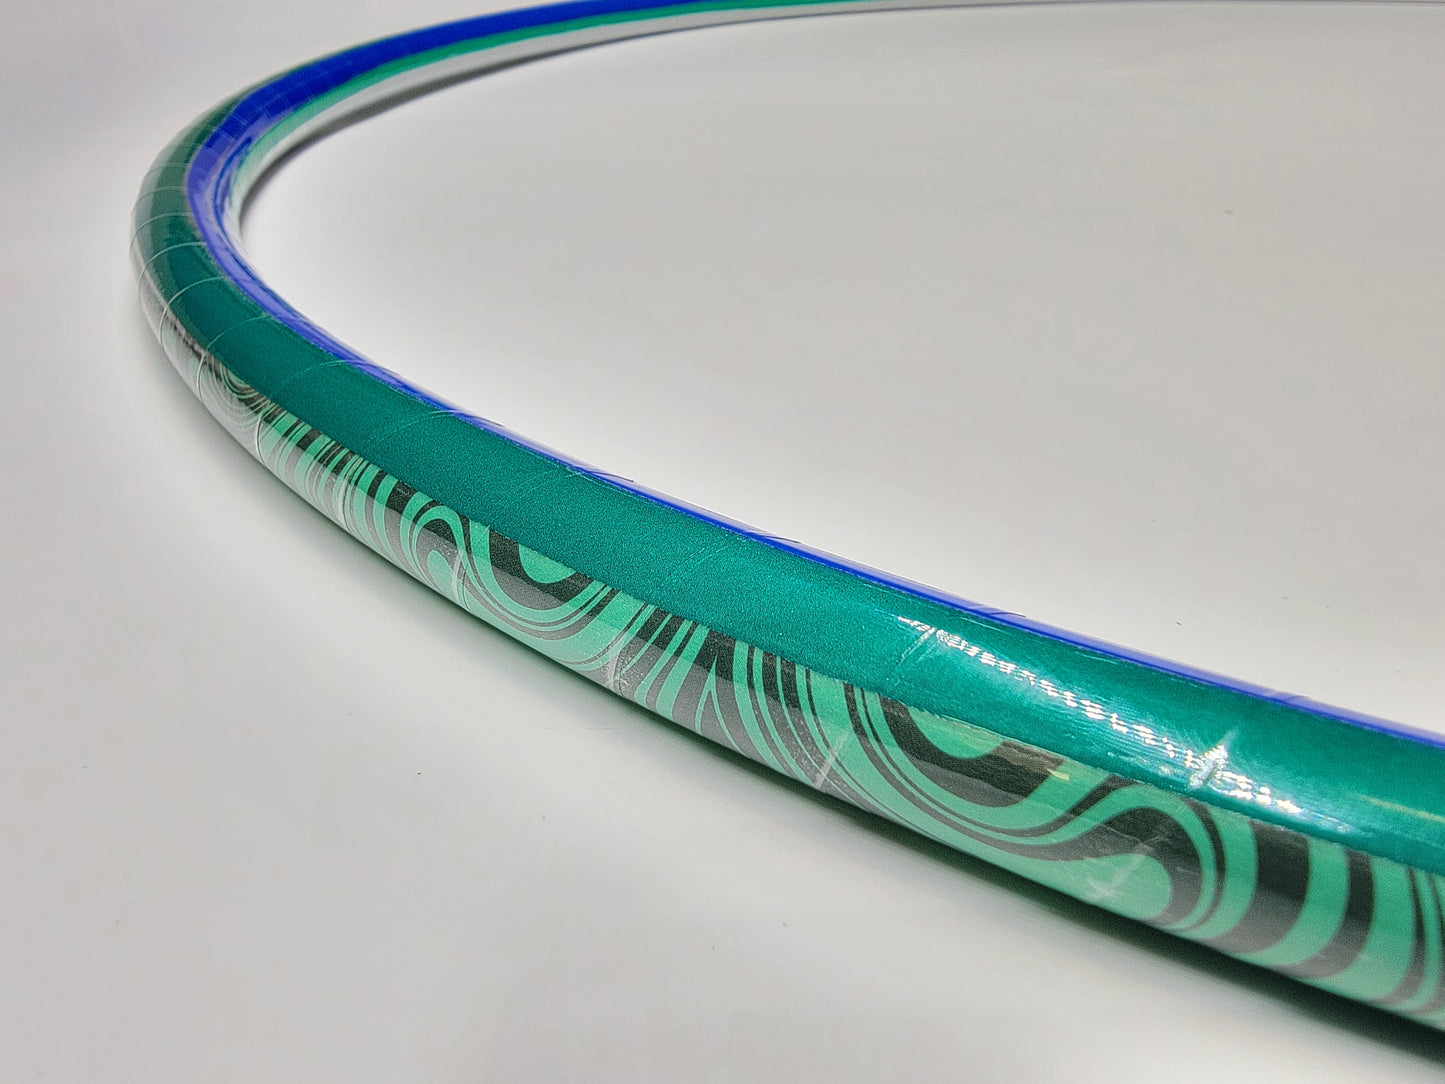 Whimsicle Swirls Coinflip Specialty Reflective Taped Hoop